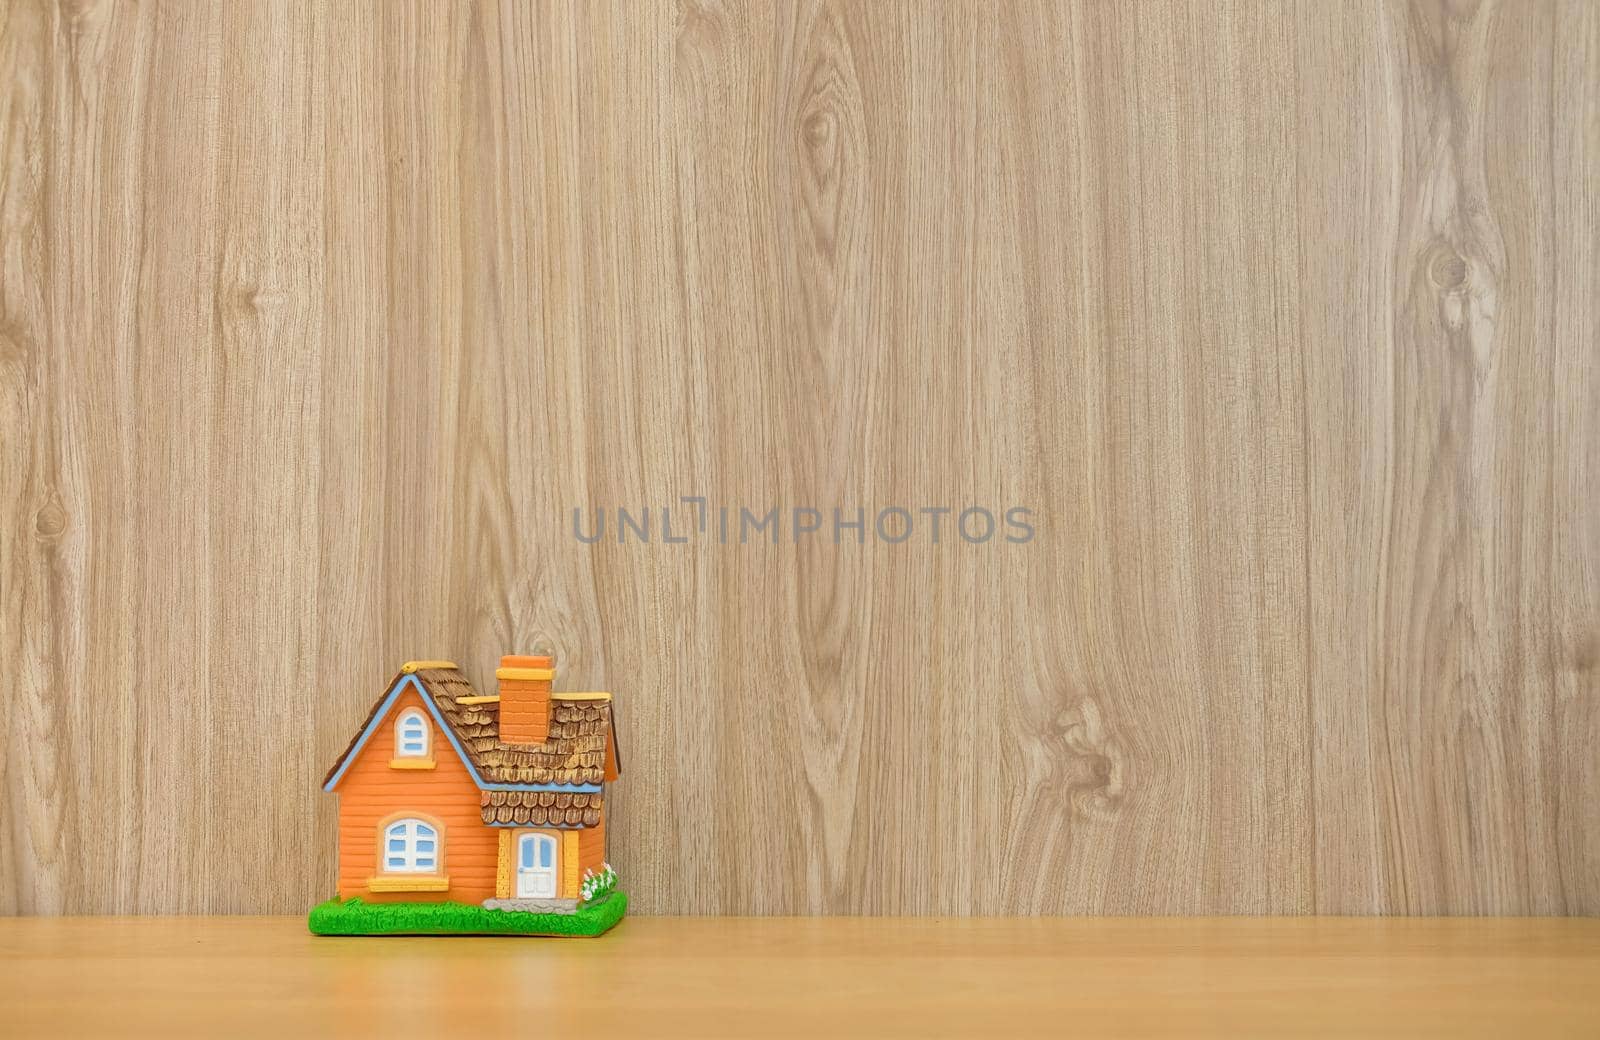 house model on wooden desk. realtor real estate agent workplace. buying selling & renting property